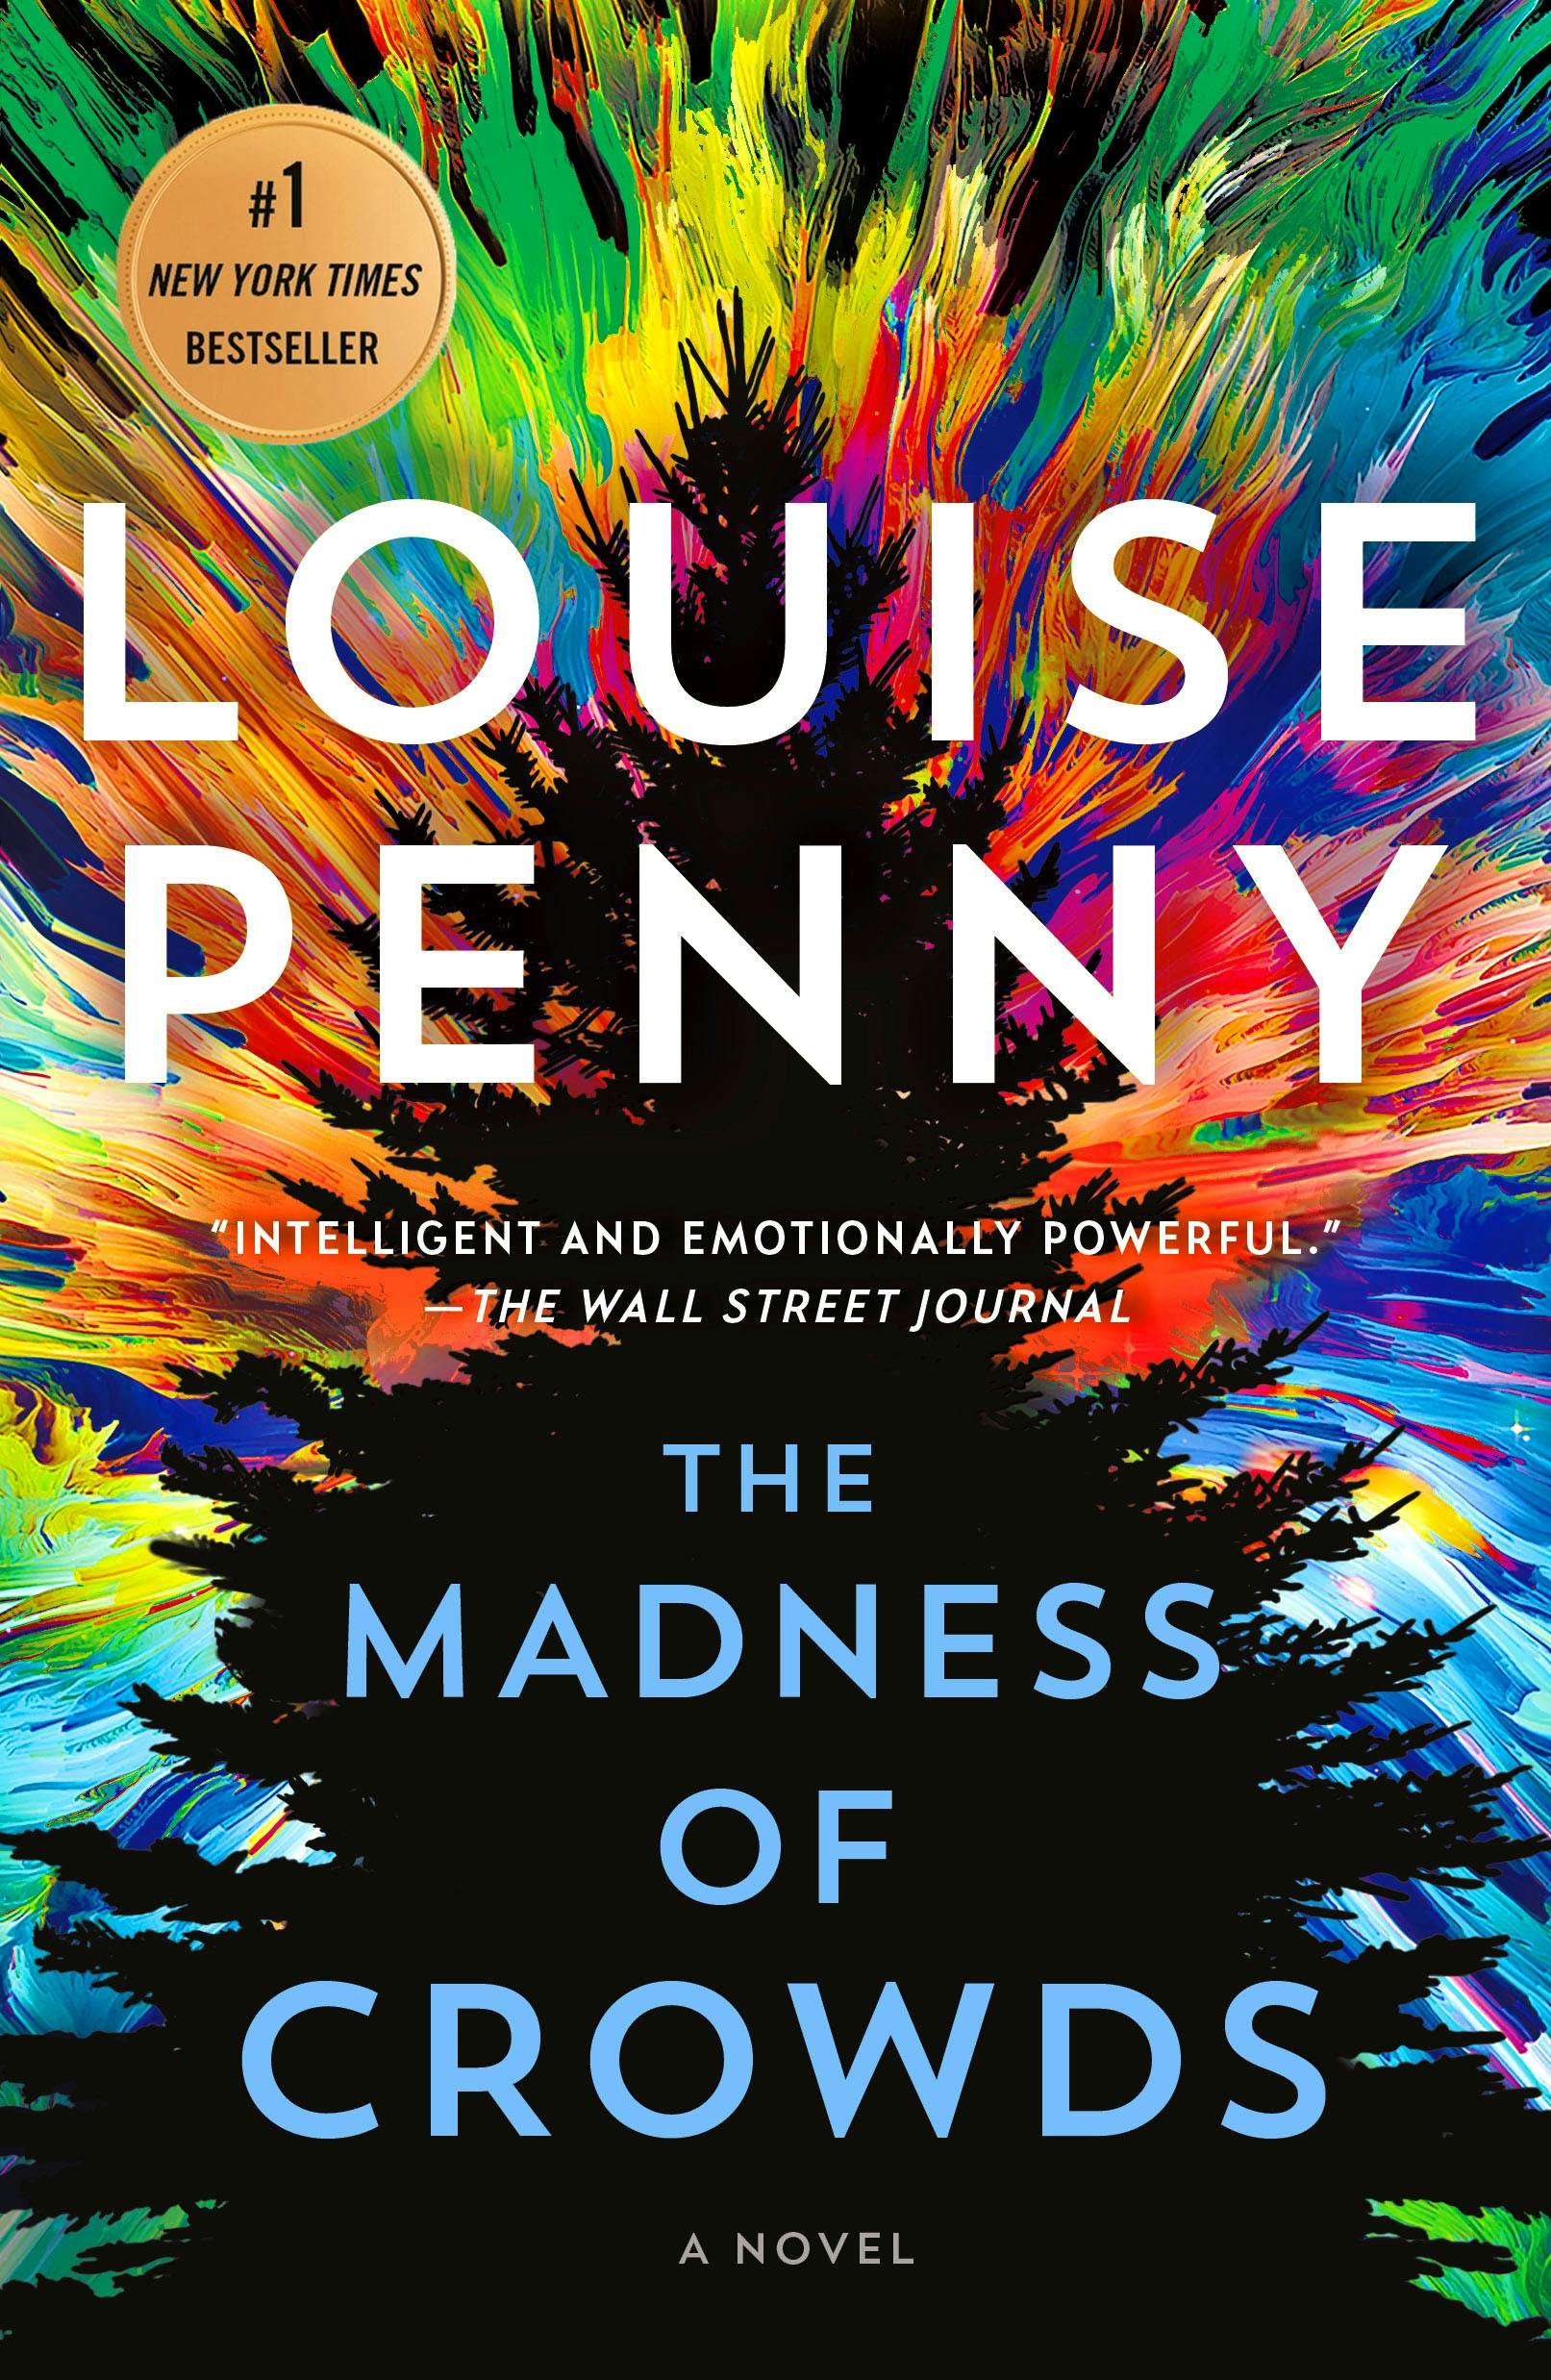 Louise Penny will be In Conversation about her New Hardcover ~ Kingdom of  the Blind: A Chief Inspector Armand Gamache Mystery